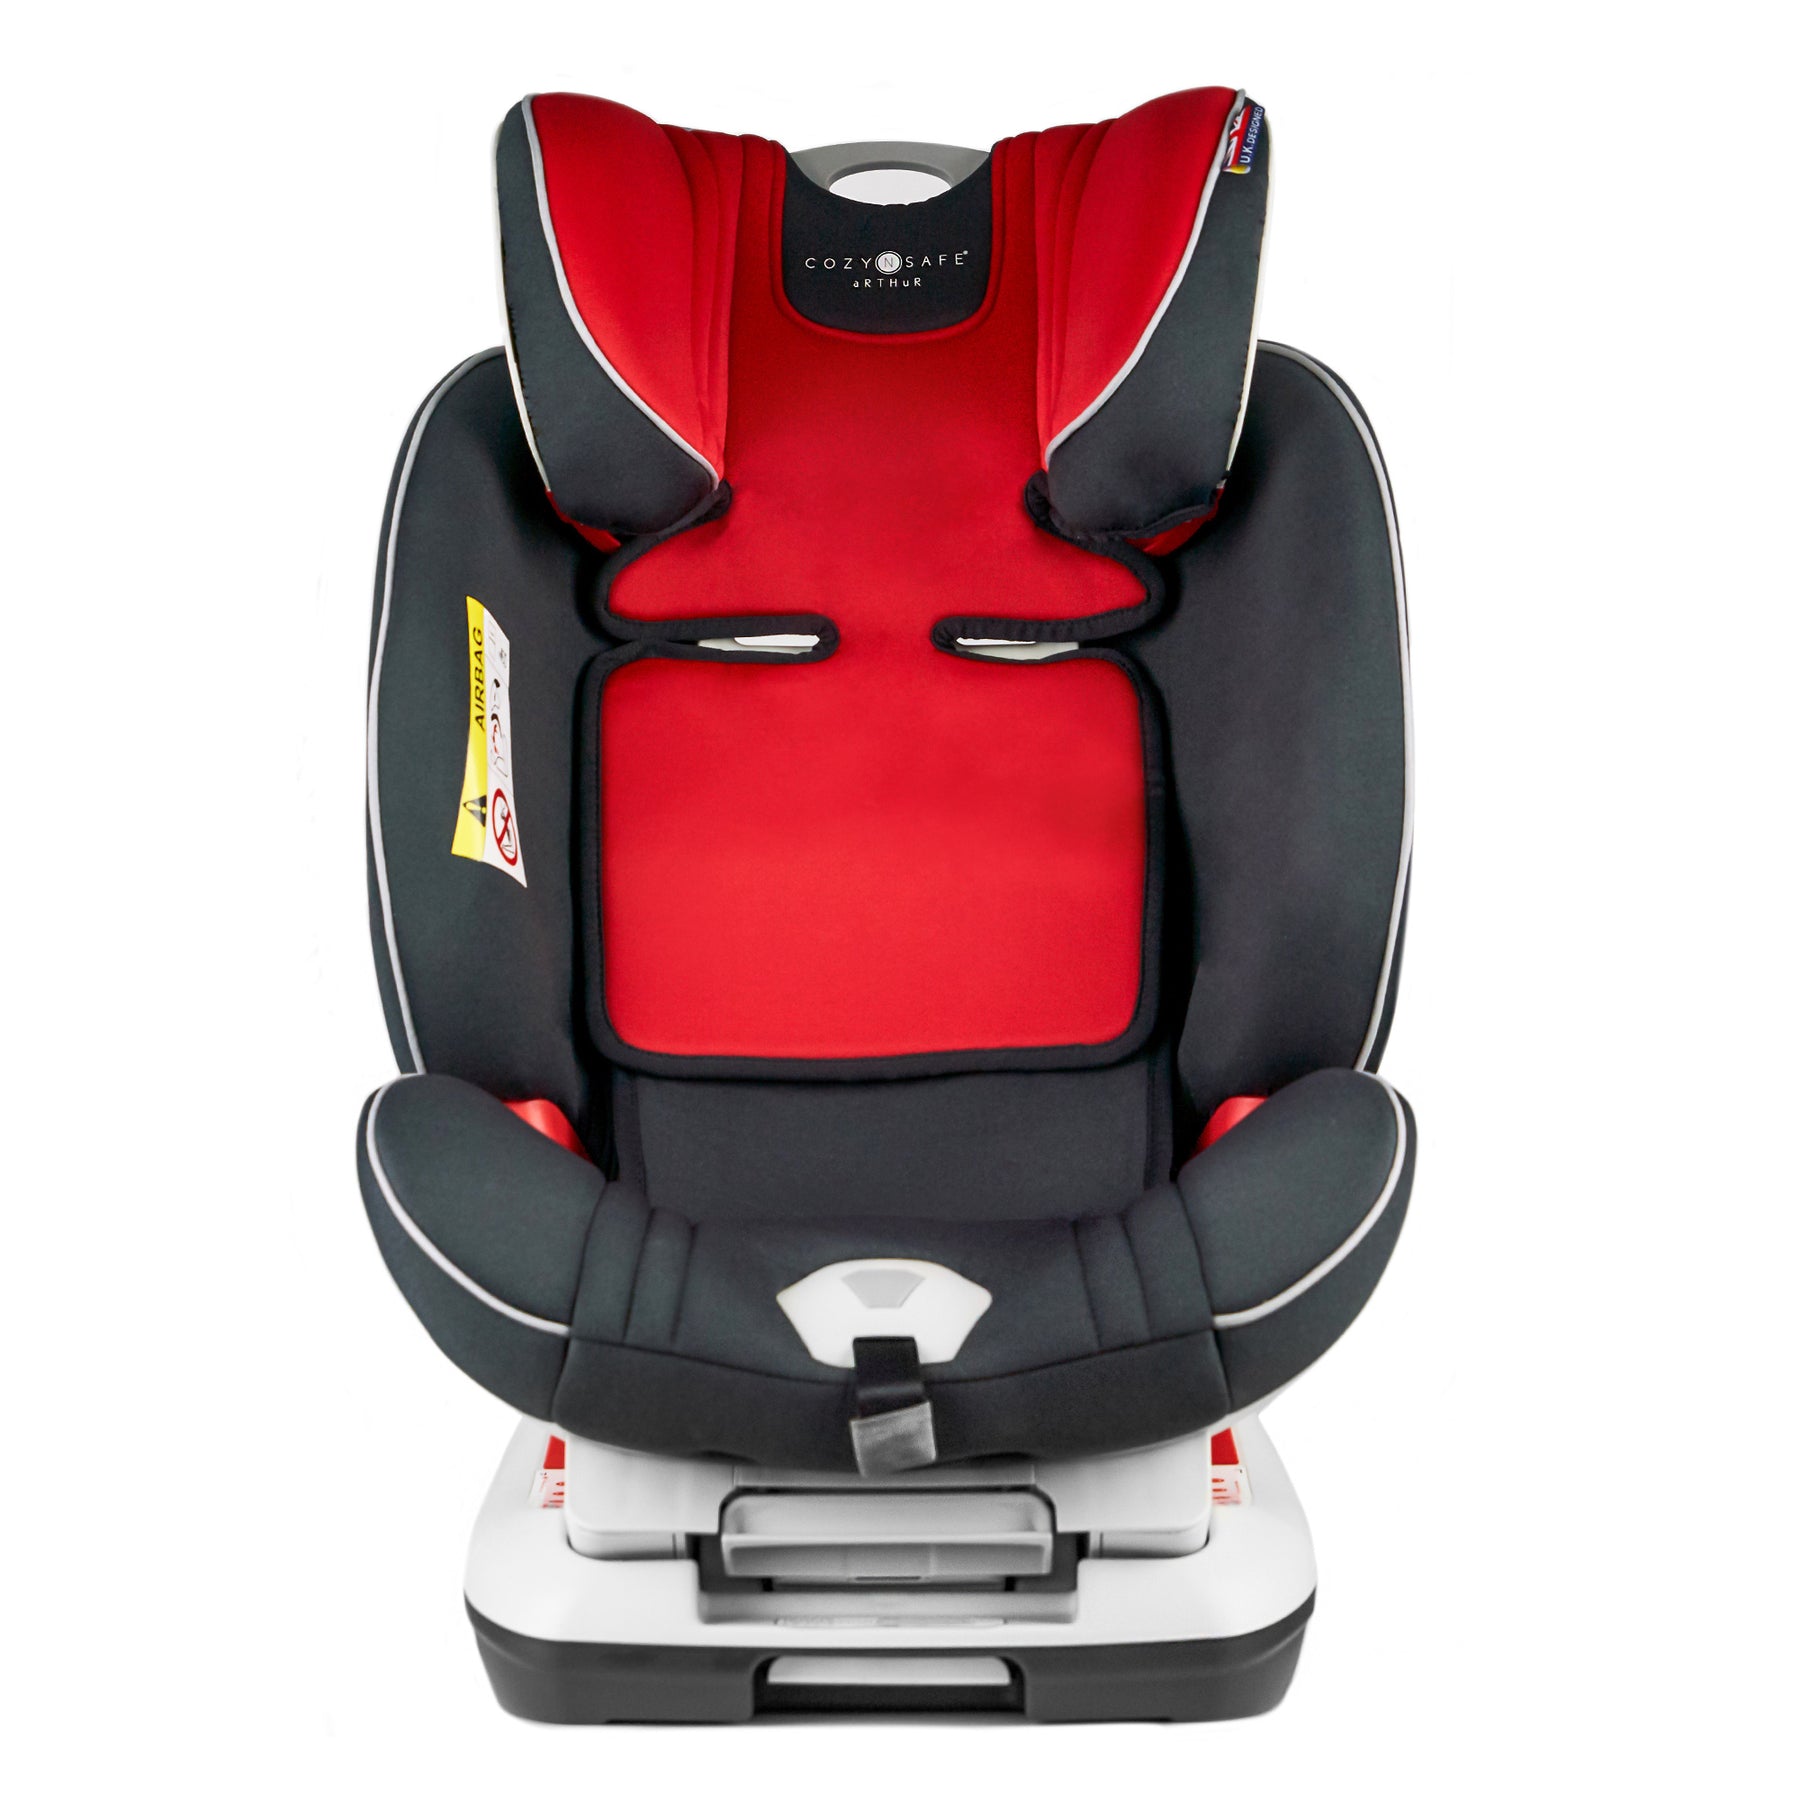 Arthur Group 0+/1/2/3 Child Car Seat - Red